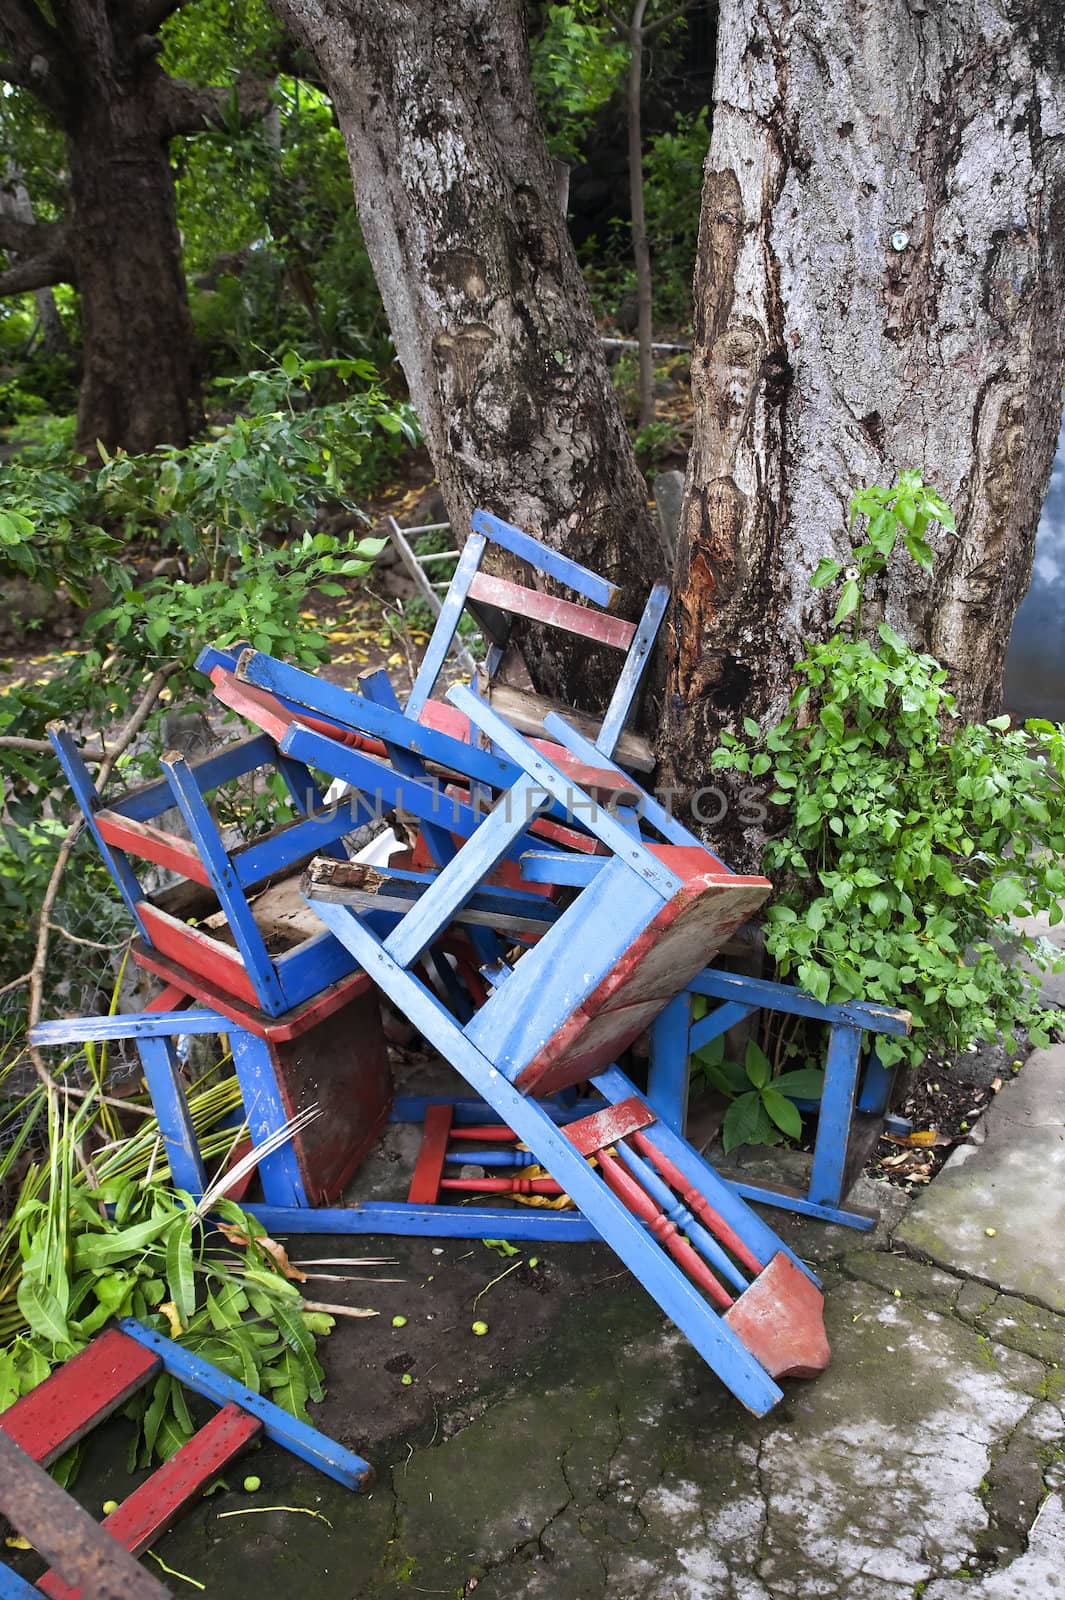 Discarded Chairs in Nicaragua by Creatista